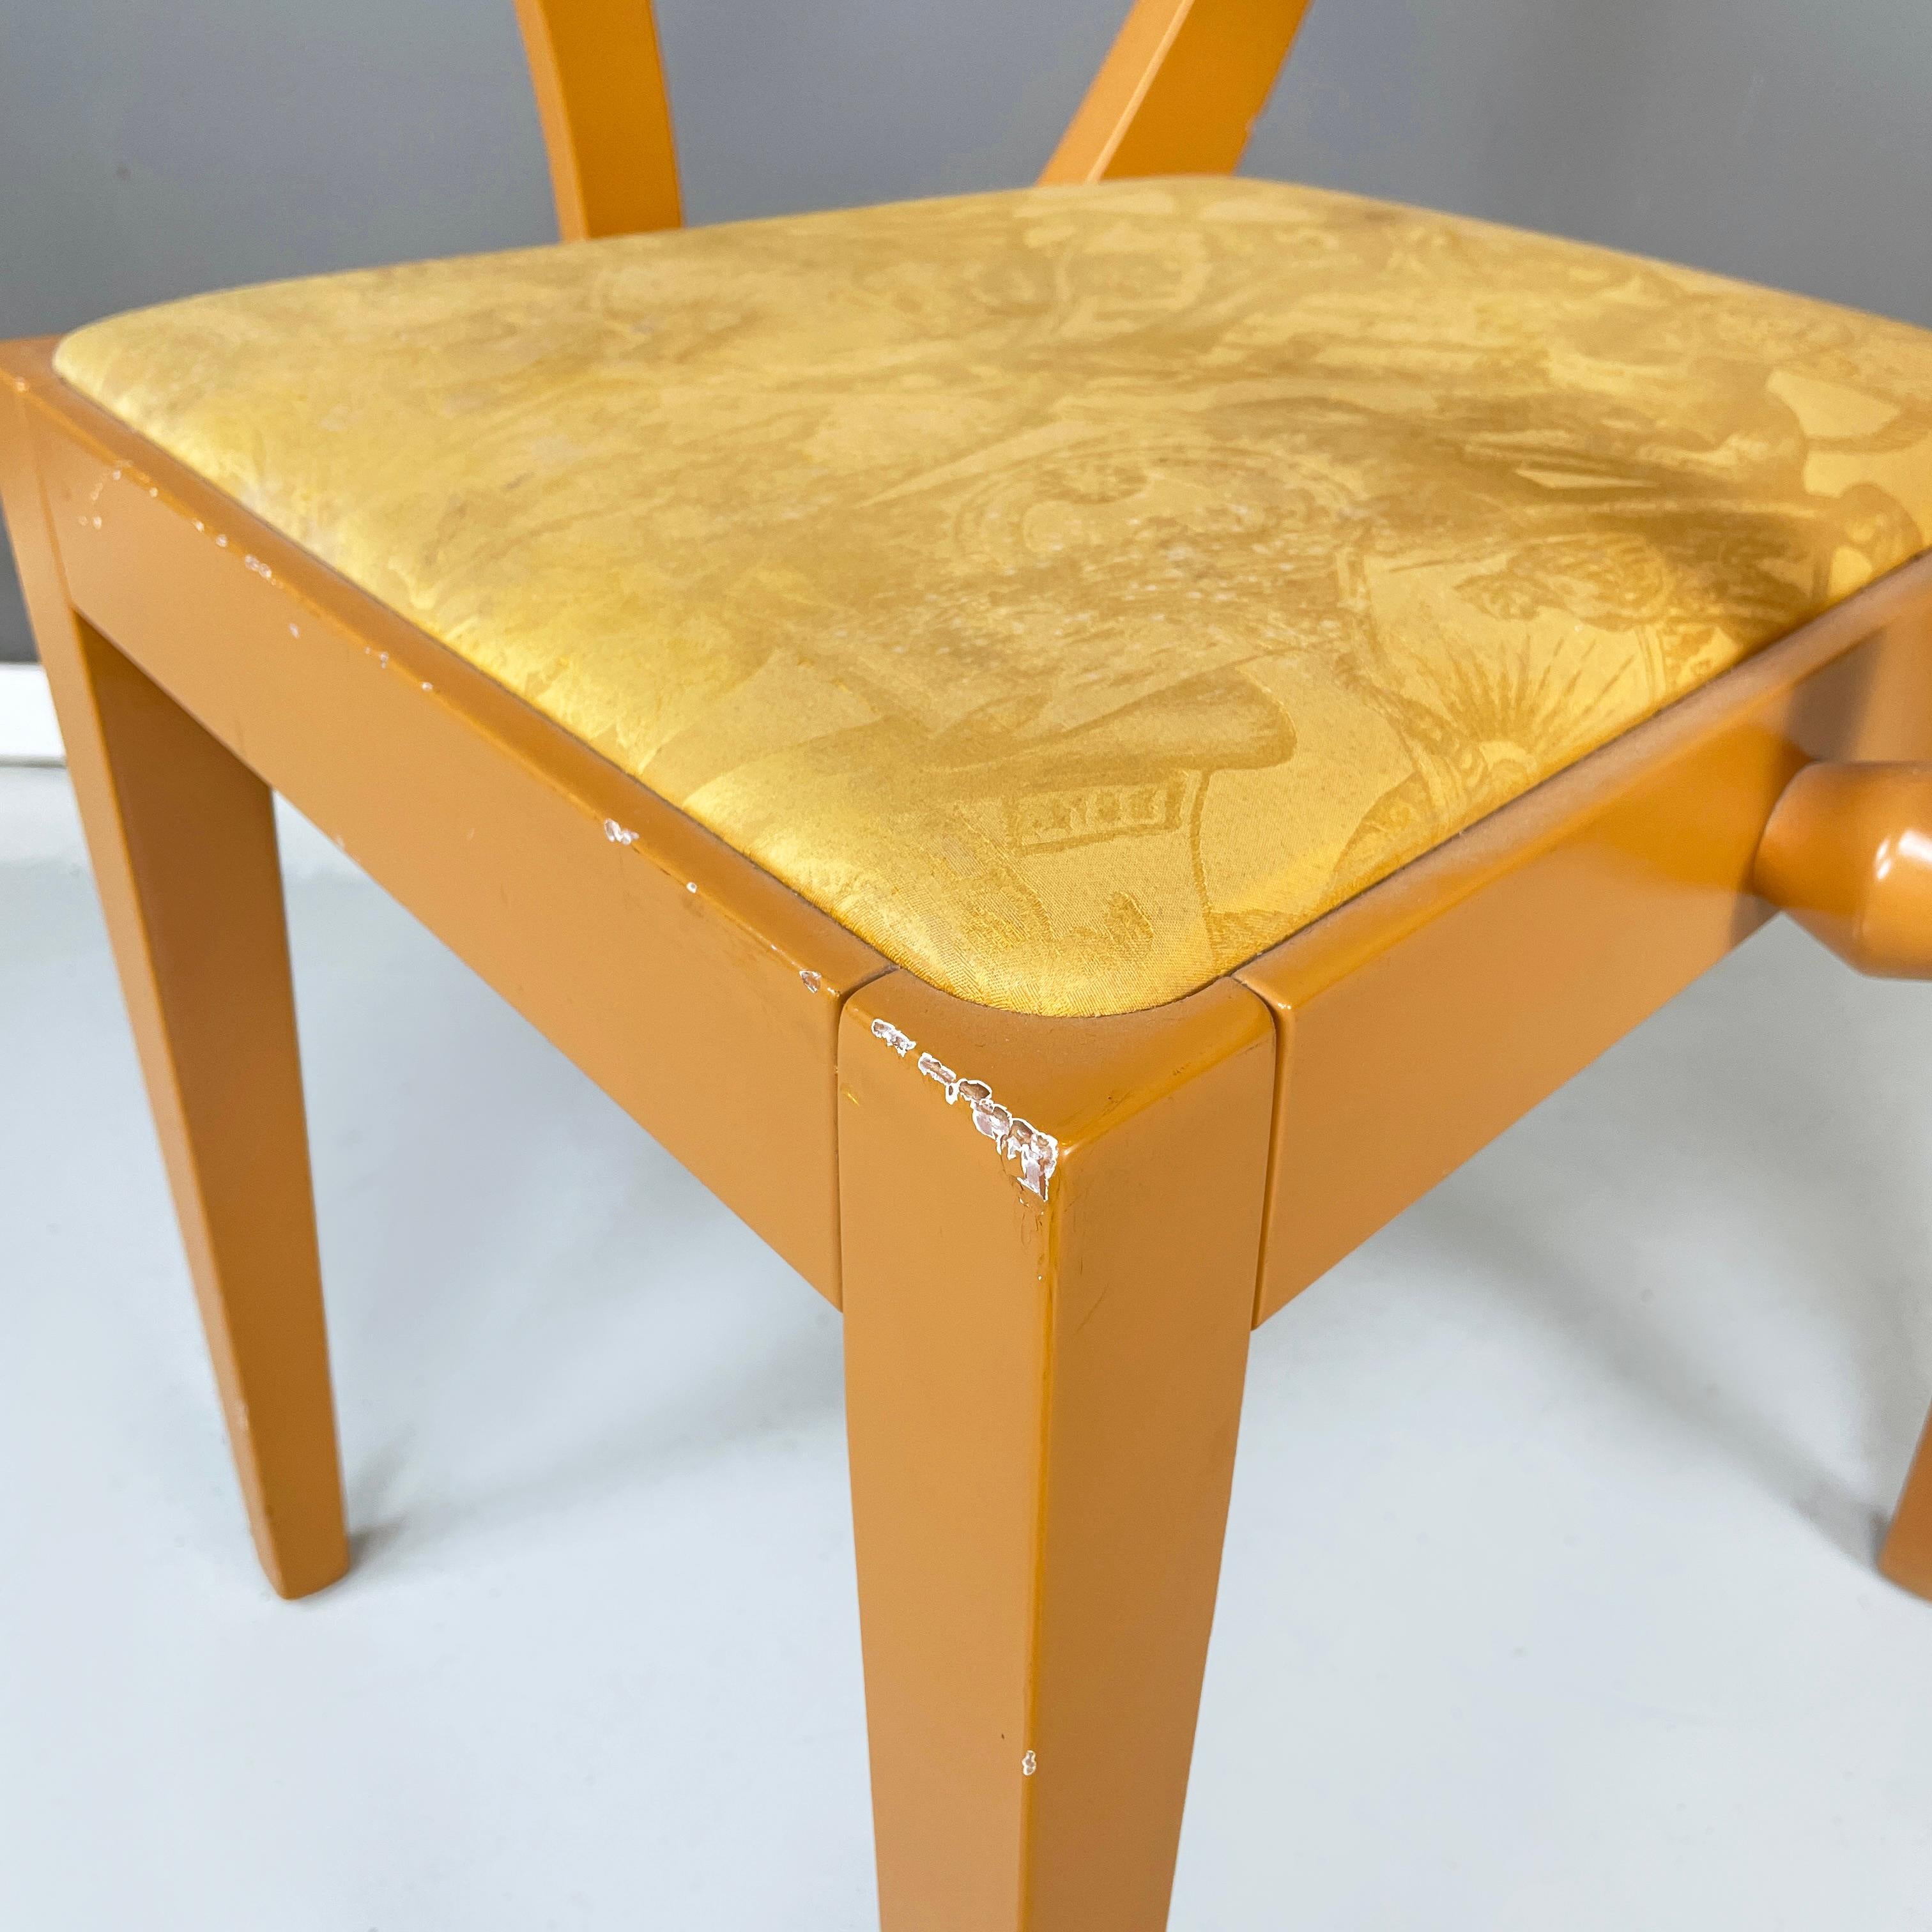 Italian modern yellow fabric and wooden chair by Bros/s, 1980s For Sale 6